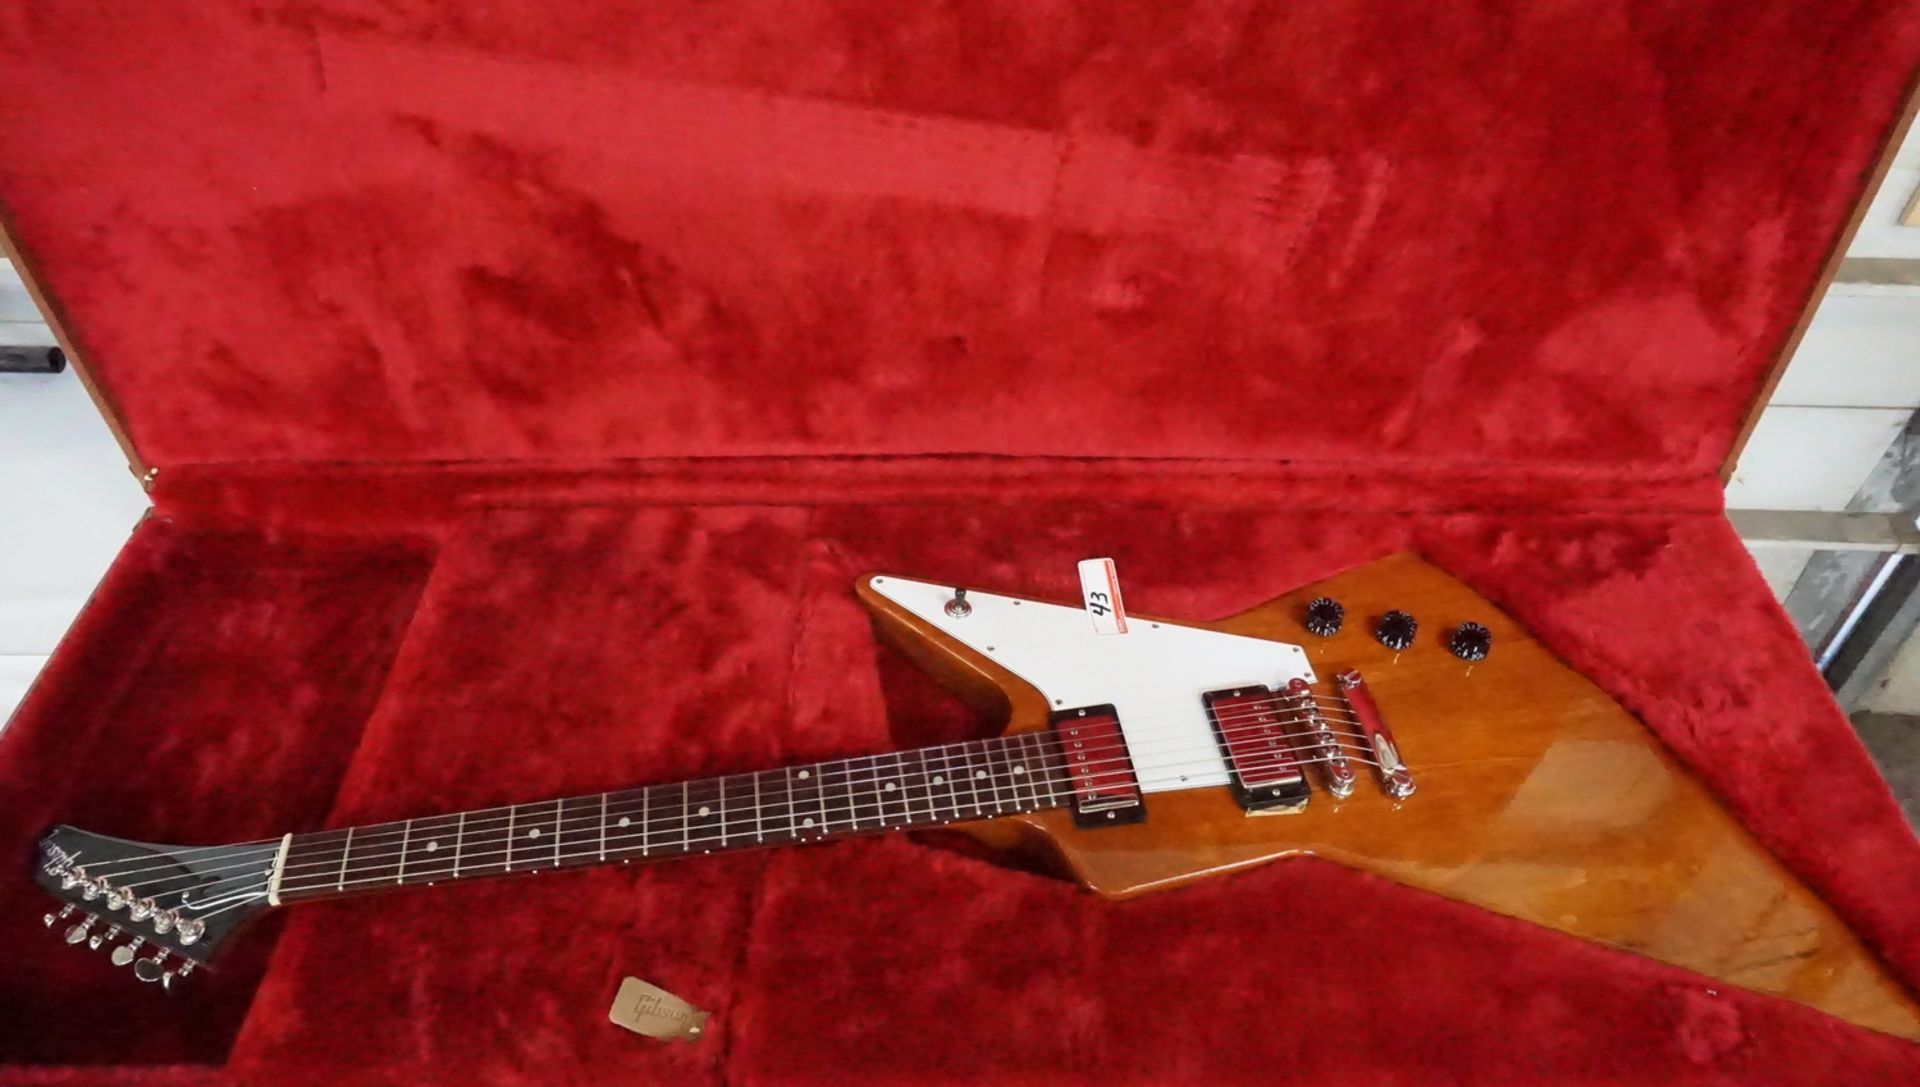 2018 GIBSON EXPLORER ANTIQUE NATRUAL ELECTRIC GUITAR (SMALL DENT ON SIDE) W/ GIBSON BROWN - Image 9 of 9